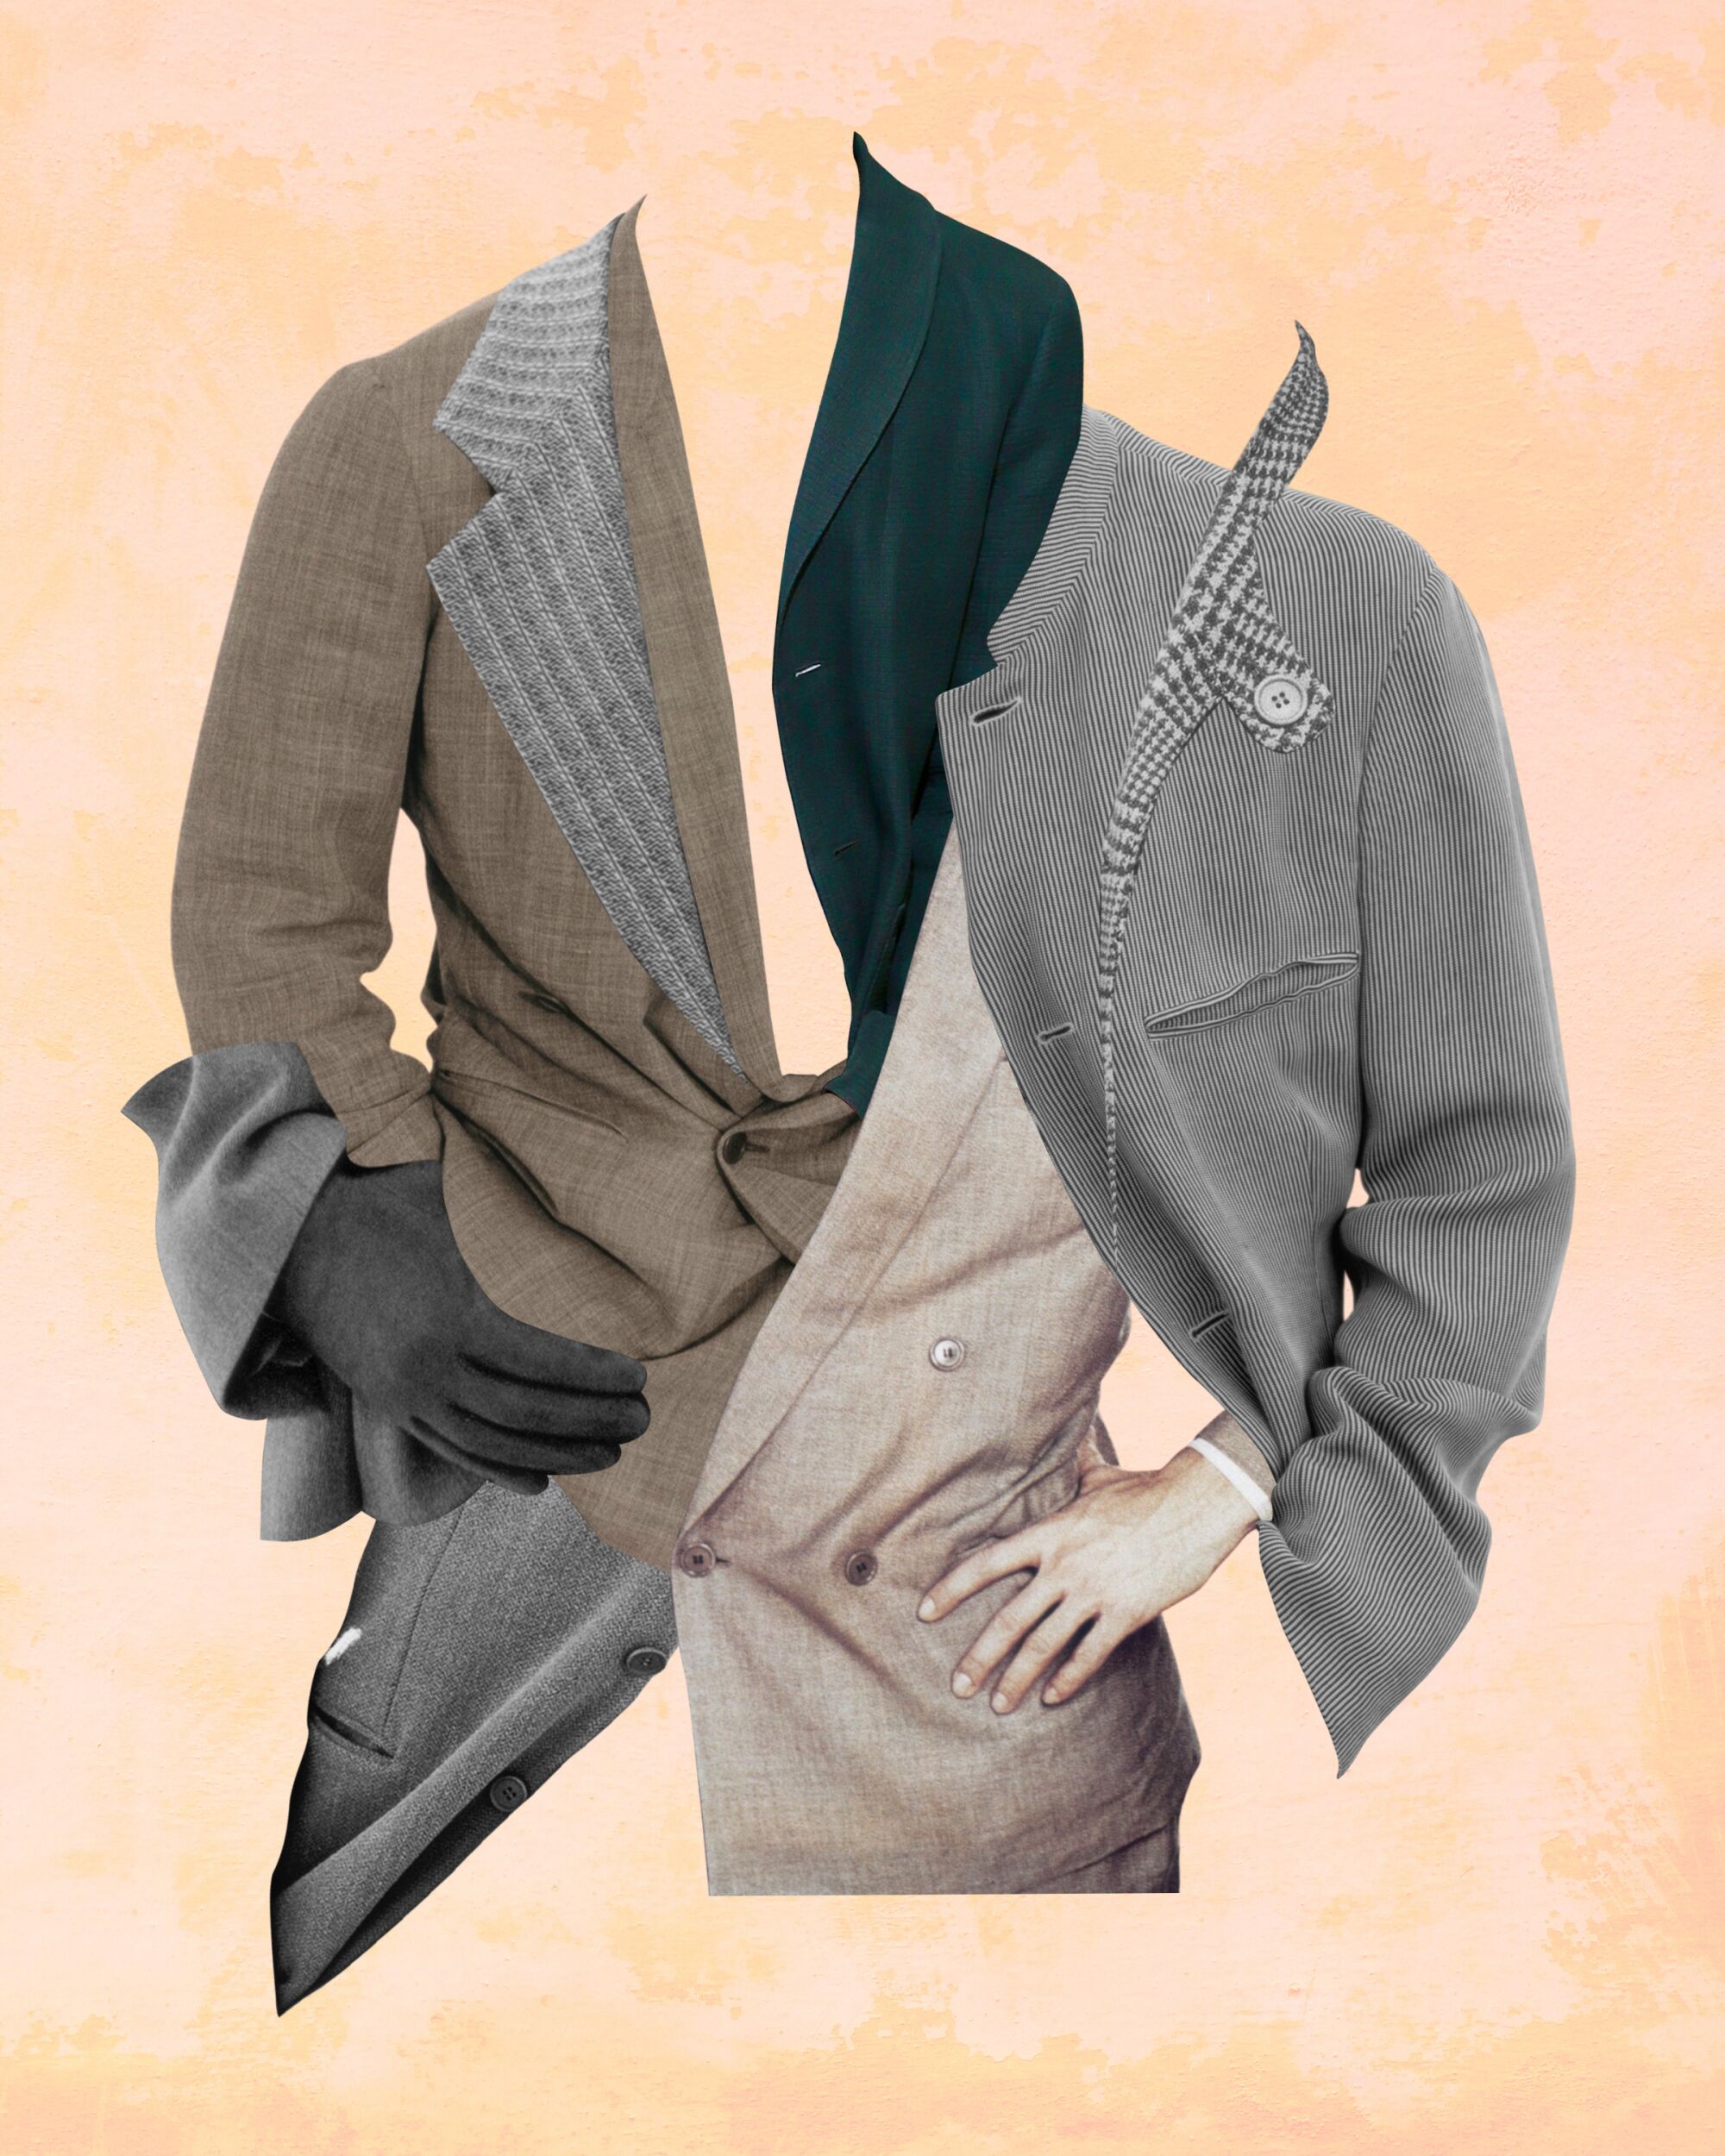 A collage of Armani jackets in different fabrics